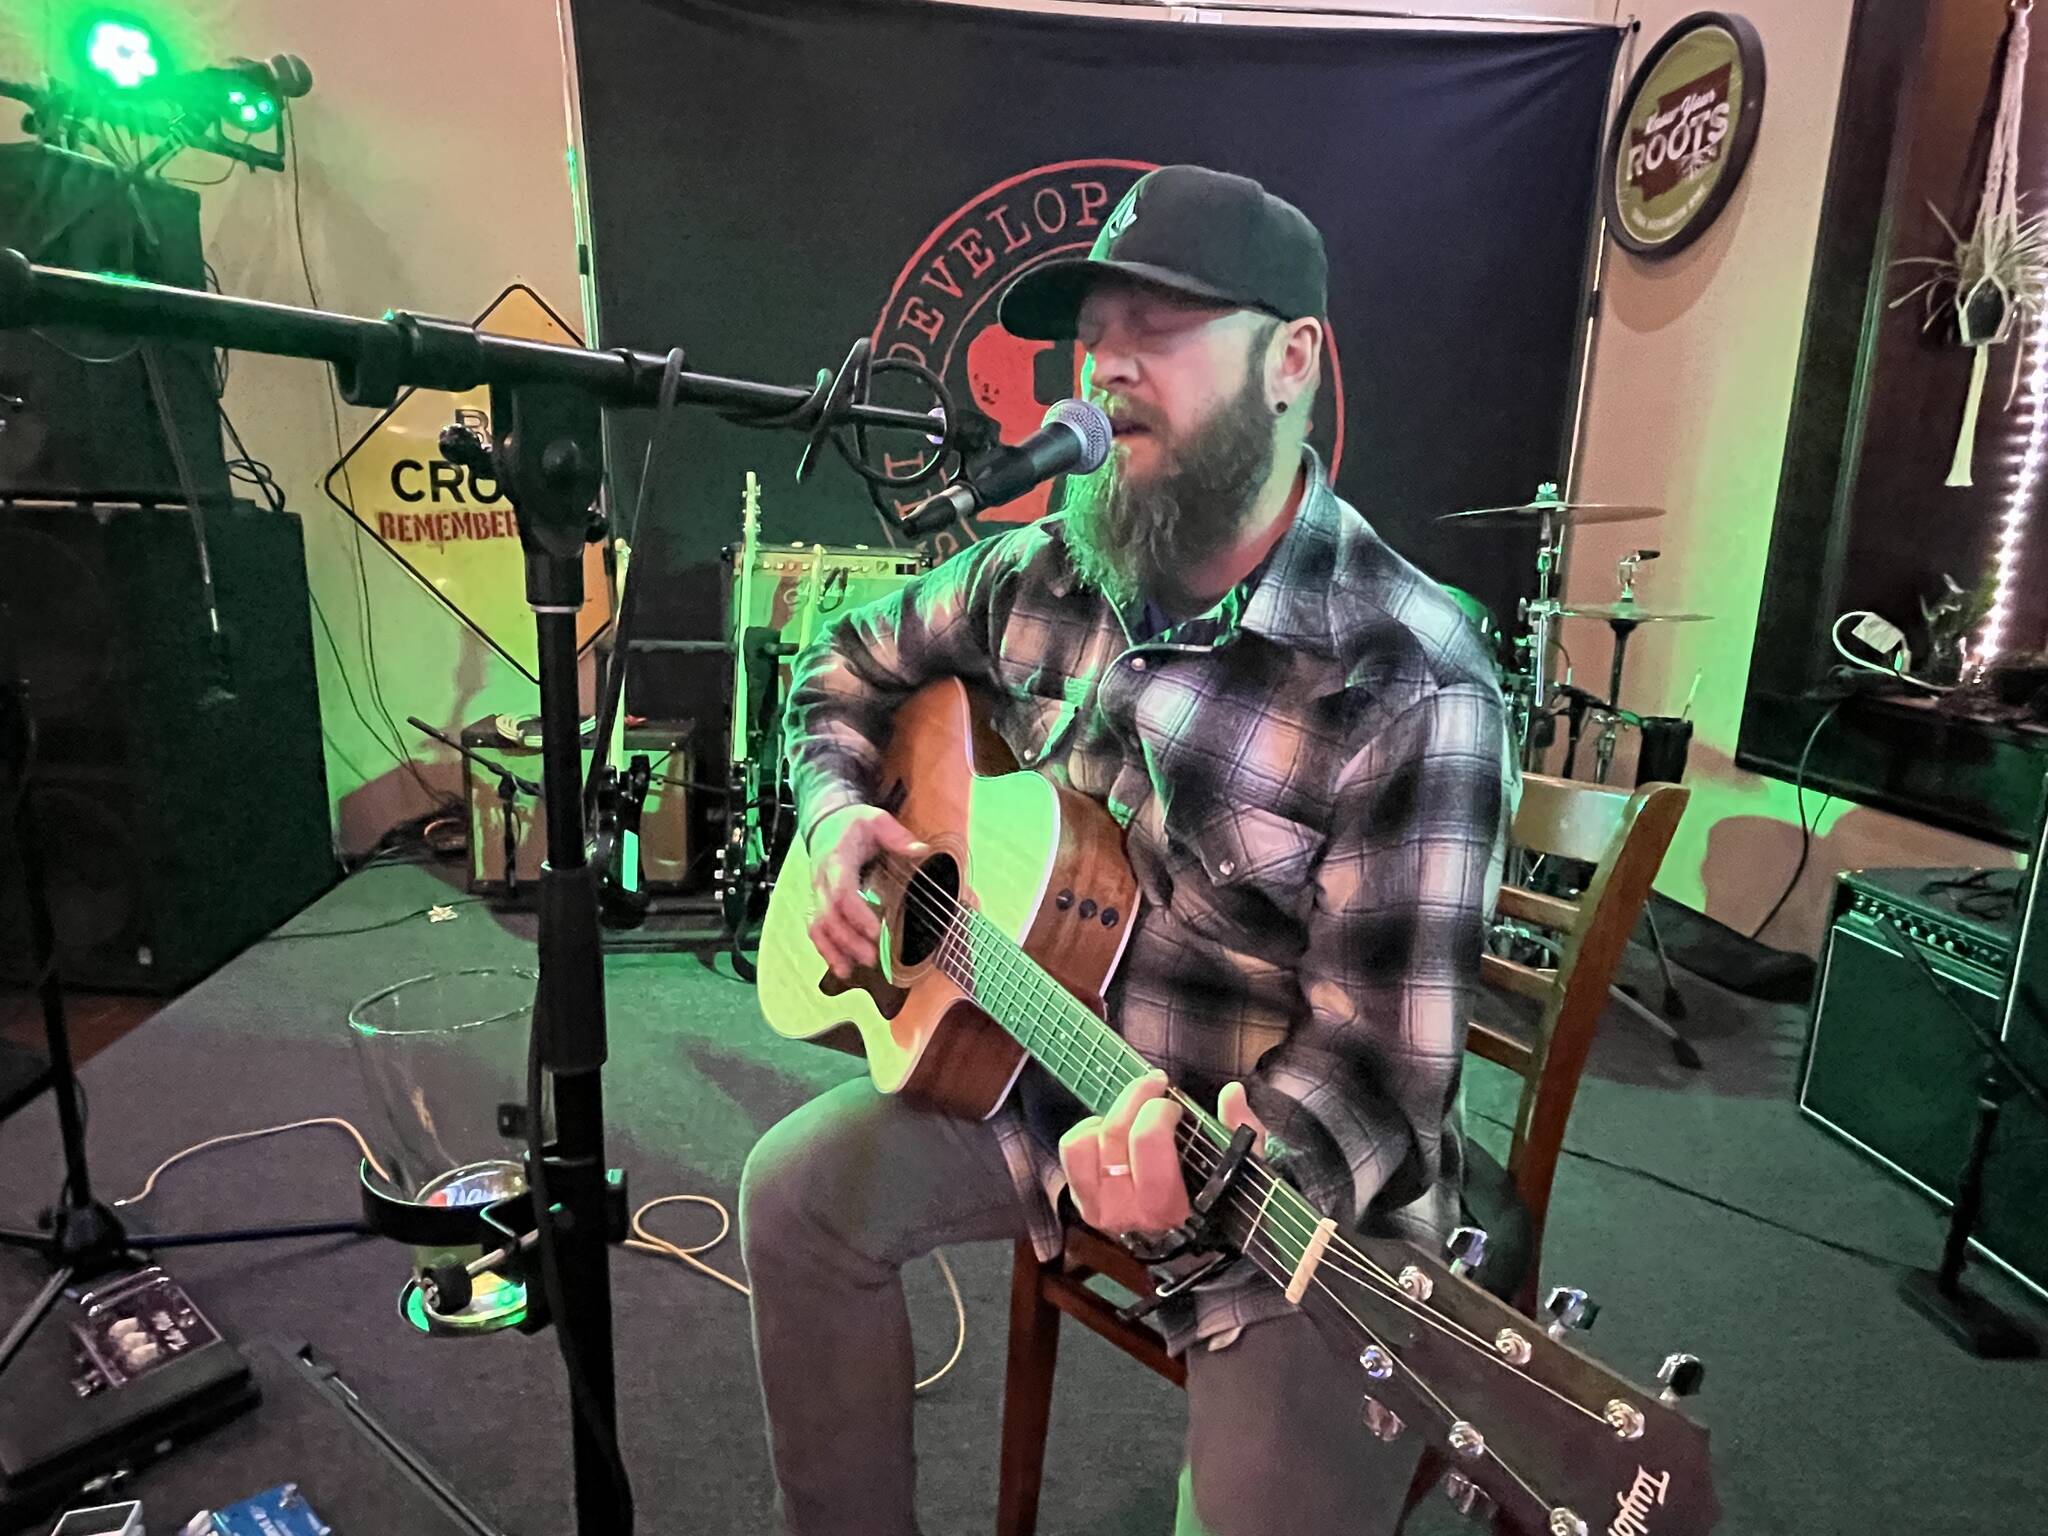 Paul Thayer explained why he loves to play the Open Mic Night at Messy Jessy’s Bar and Grill. “It’s the support, the lack of judgement that comes from the other people. Seriously,” Thayer said. “It’s a wide variety of people and all different types of music.” (Matthew N. Wells / The Daily World)